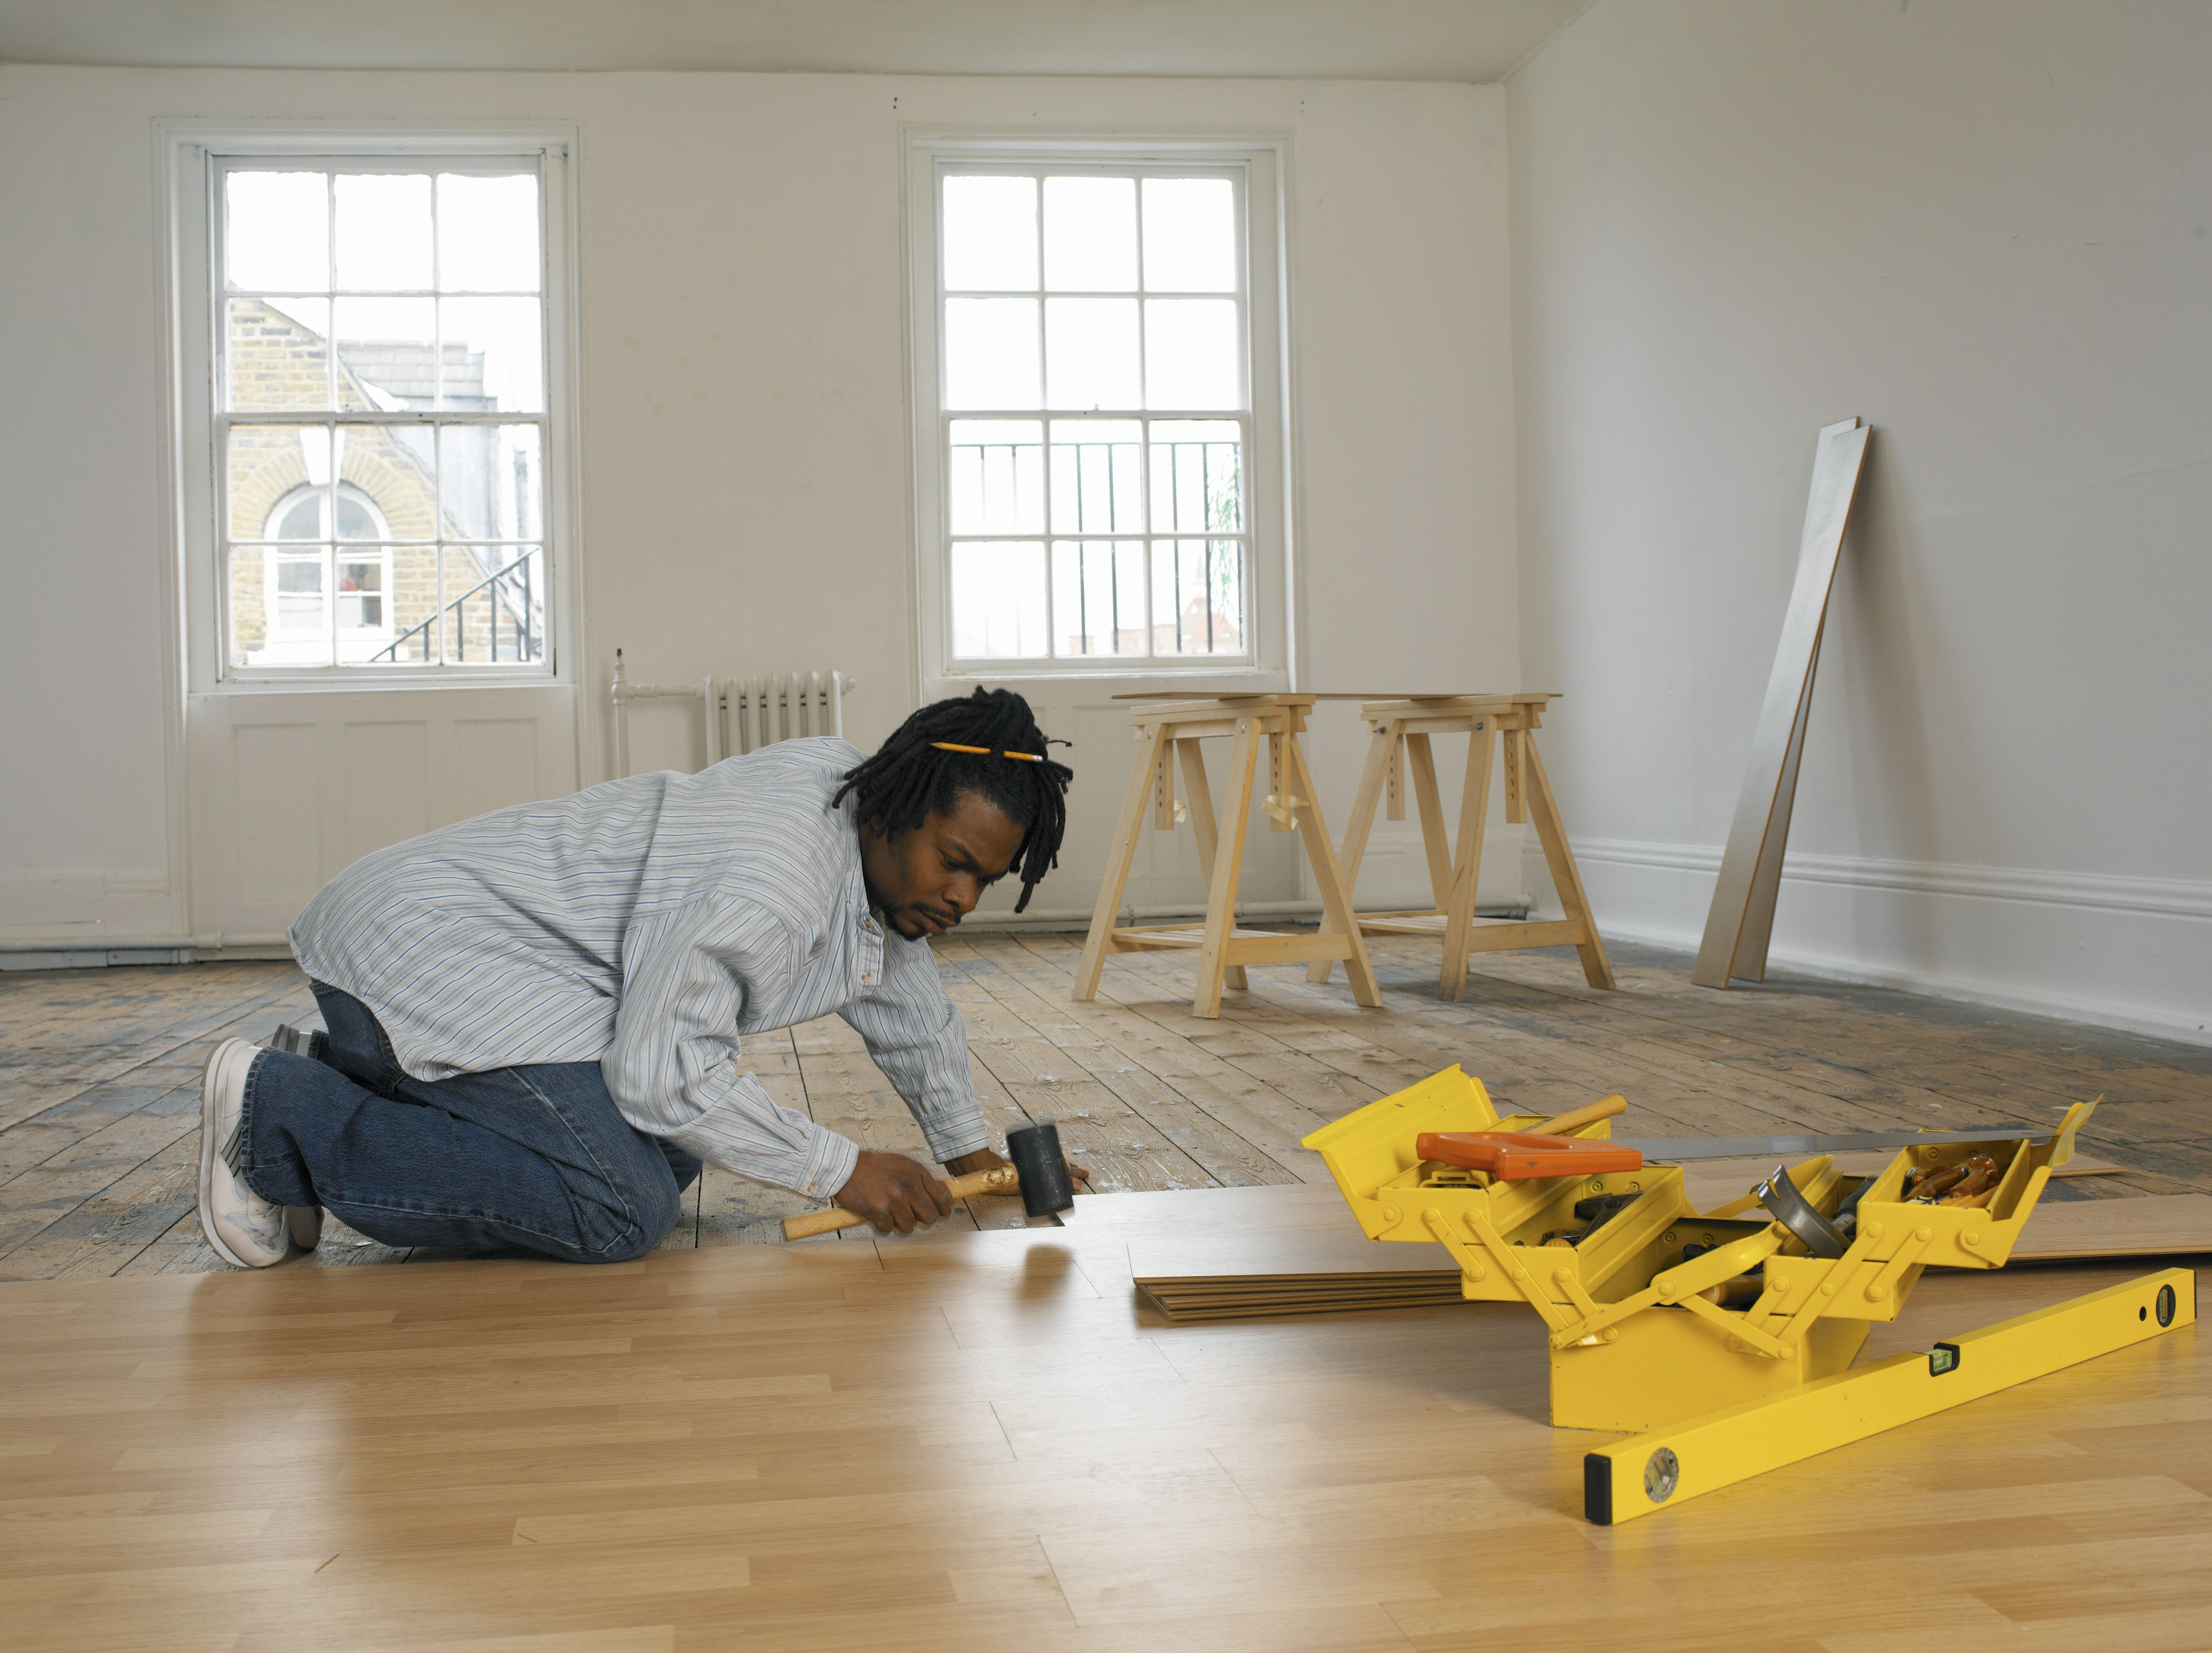 23 Awesome Price to Install Hardwood Floors Home Depot 2024 free download price to install hardwood floors home depot of ikea flooring review overview within young man laying floor 200199826 001 57e96a973df78c690f719440